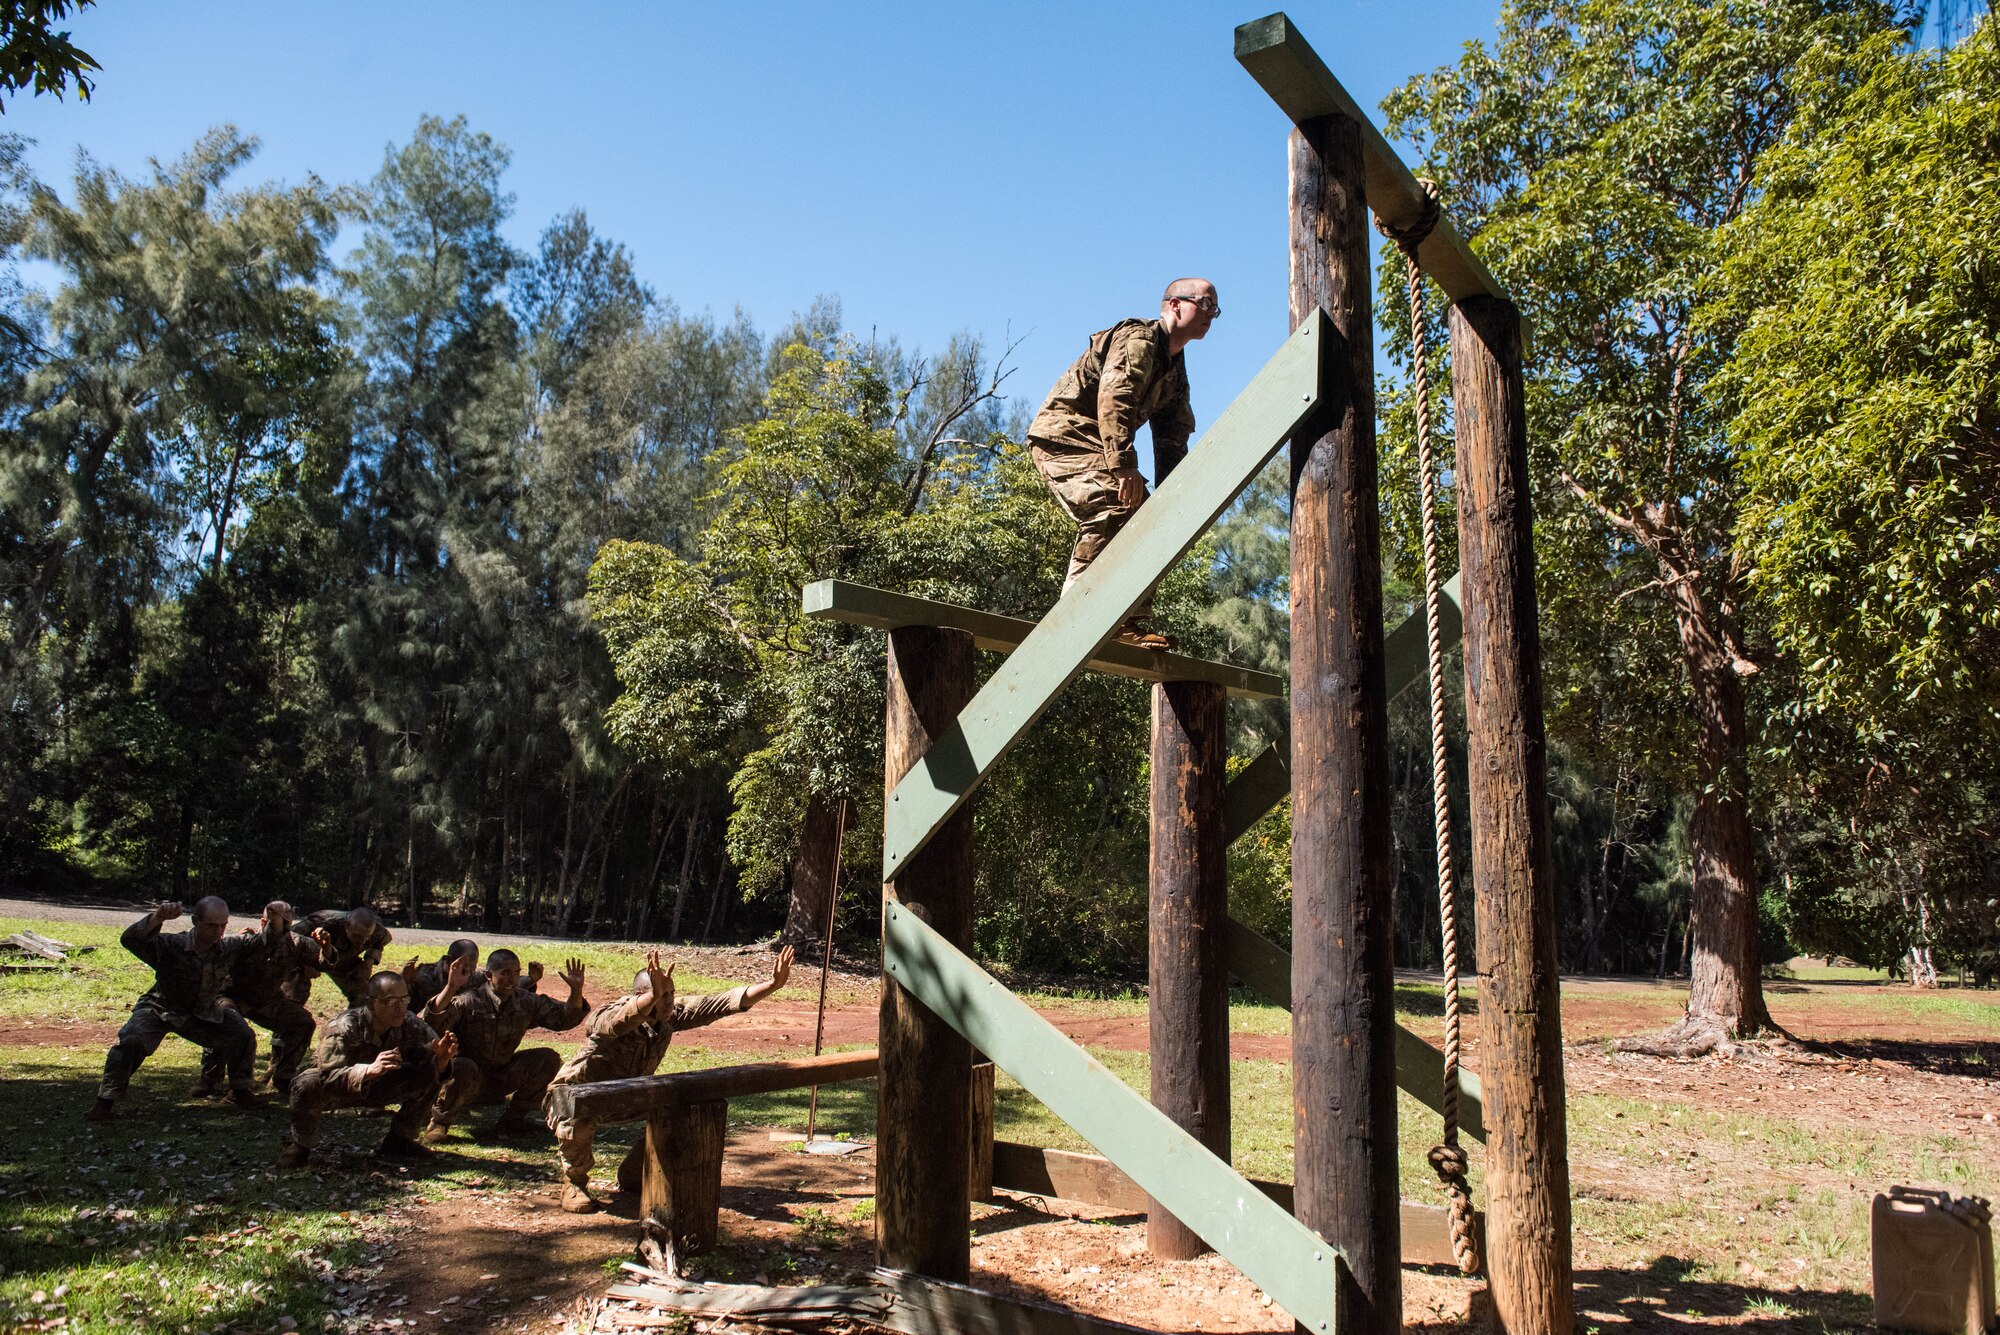 1st Lt. Austin Drake, Ranger Assessment Course student, prepares to jump to the next rung on an obstacle course during training near Schofield Barracks, Oahu, Hawaii, May 20, 2019. The purpose of the 19-day course is to prepare, assess and evaluate Air Force candidates for Army Ranger School. Of the 23 Airmen who began the Ranger Assessment Course, three dropped for personal motivational reasons and one dropped for medical reasons, leaving 19 standing at the end. Out of the 19, 11 Airmen met all the standards needed for a recommendation to go forward to Ranger School. (U.S. Air Force photo by Staff Sgt. Hailey Haux)